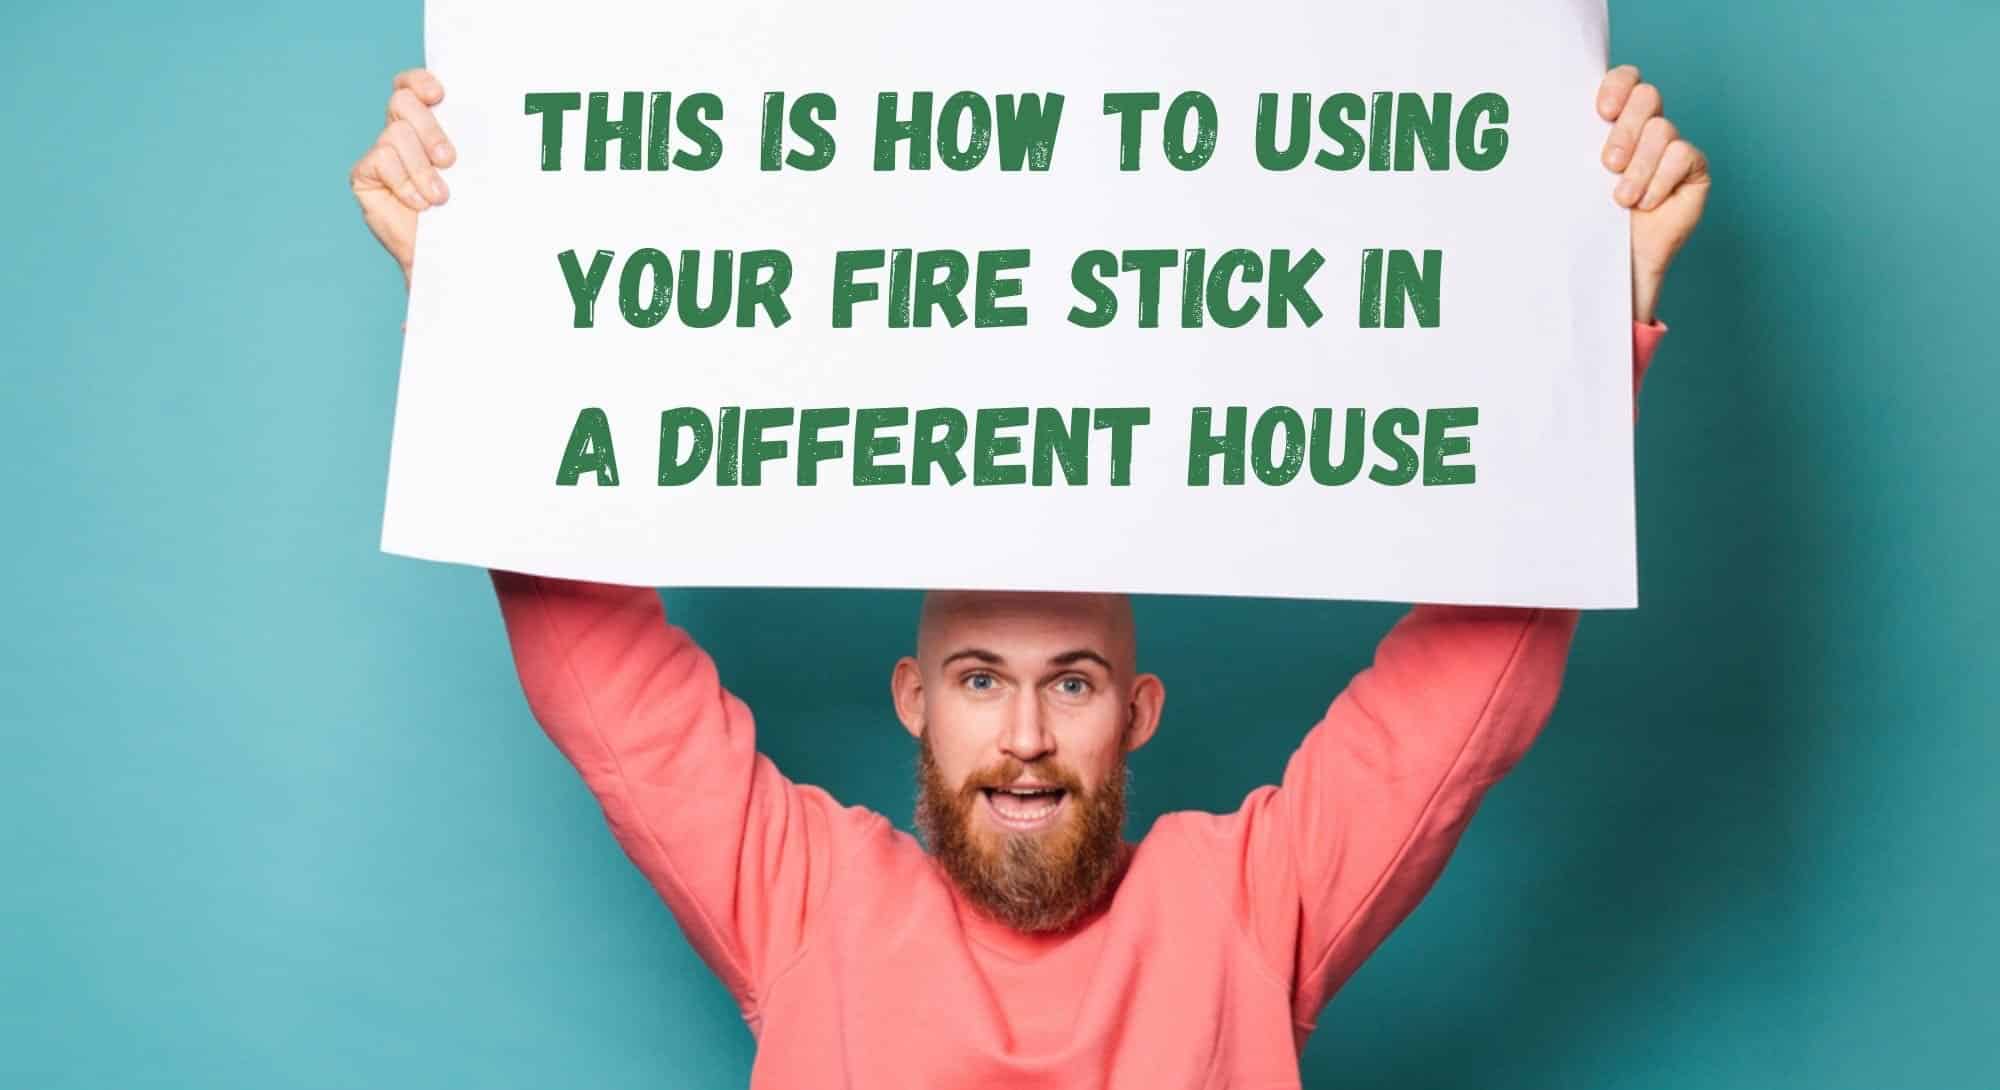 How to Using Your Fire Stick in a Different House